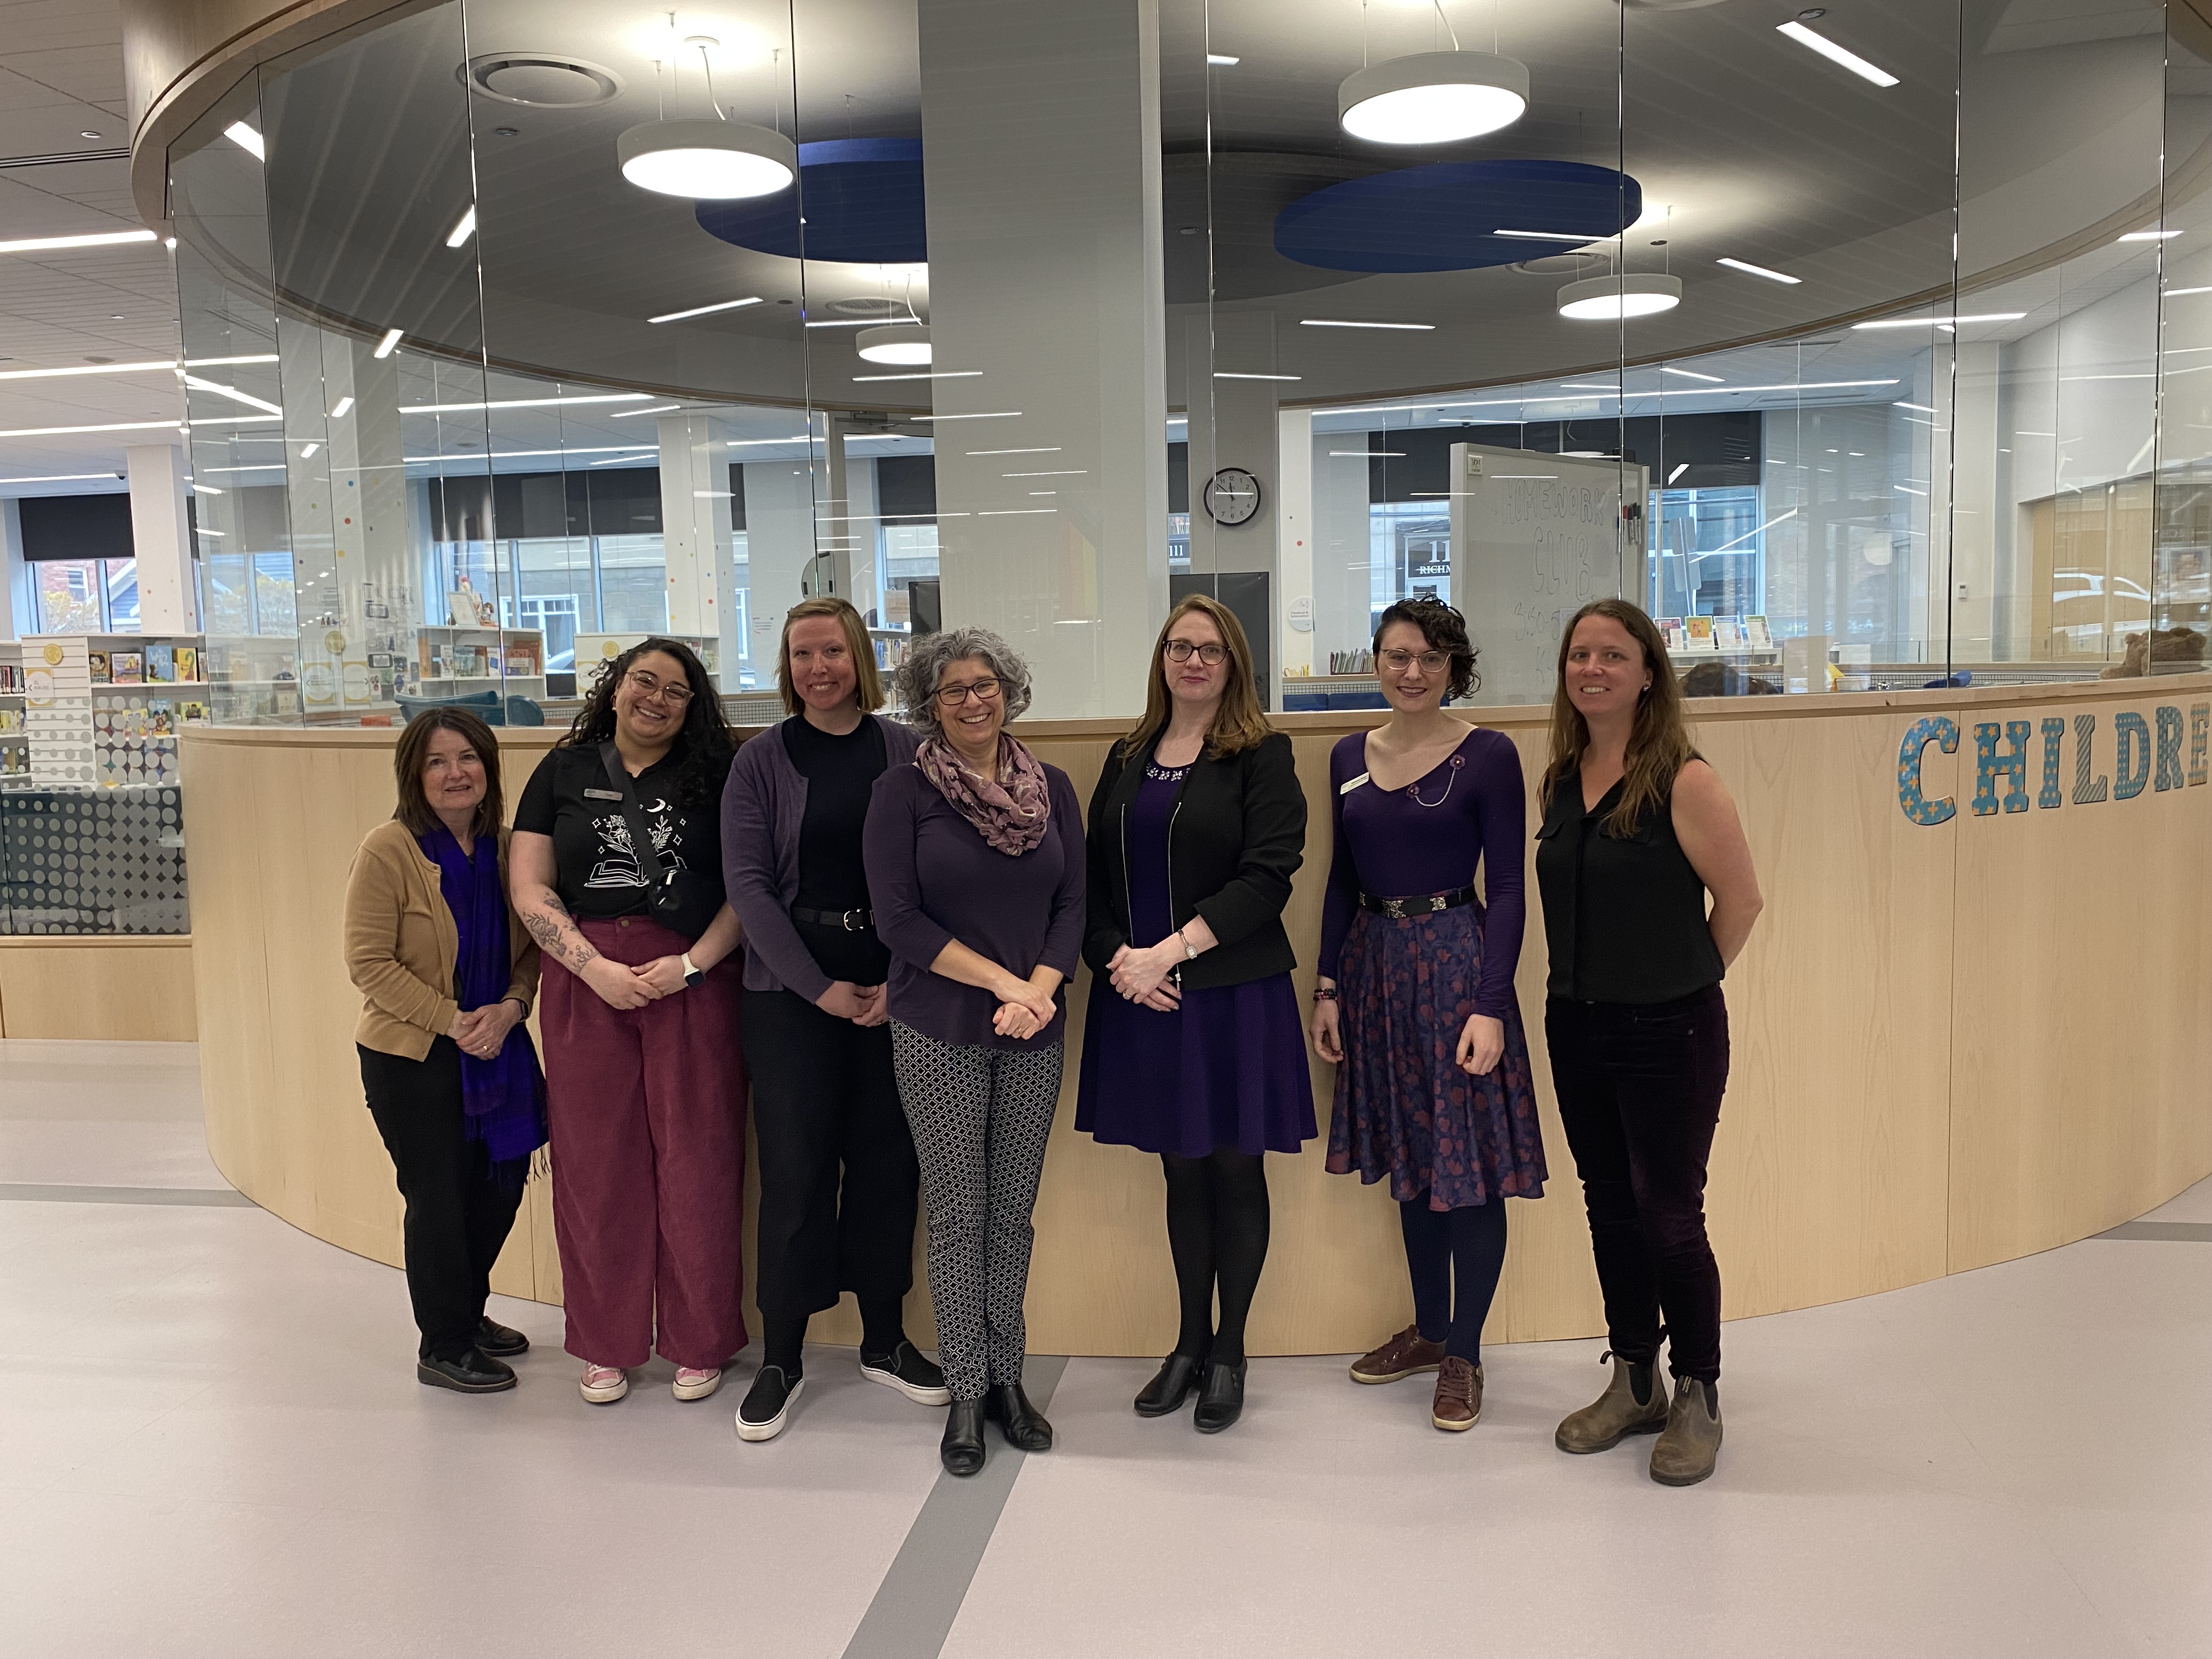 Department of Education and Early Years employees wearing purple in support of Family Violence Prevention Week 2023